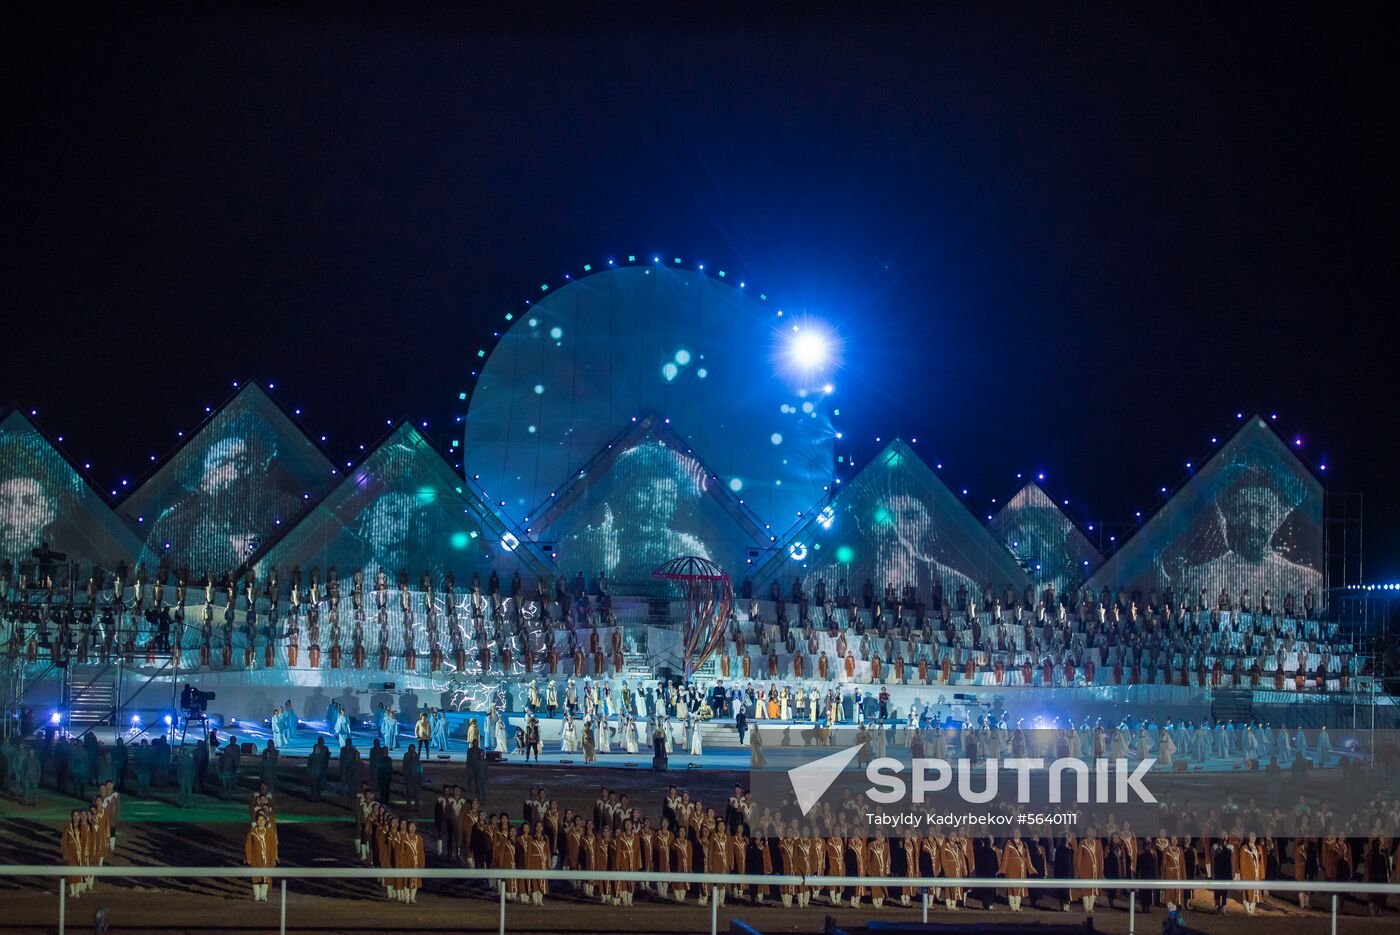 Third World Nomad Games kick off with opening ceremony